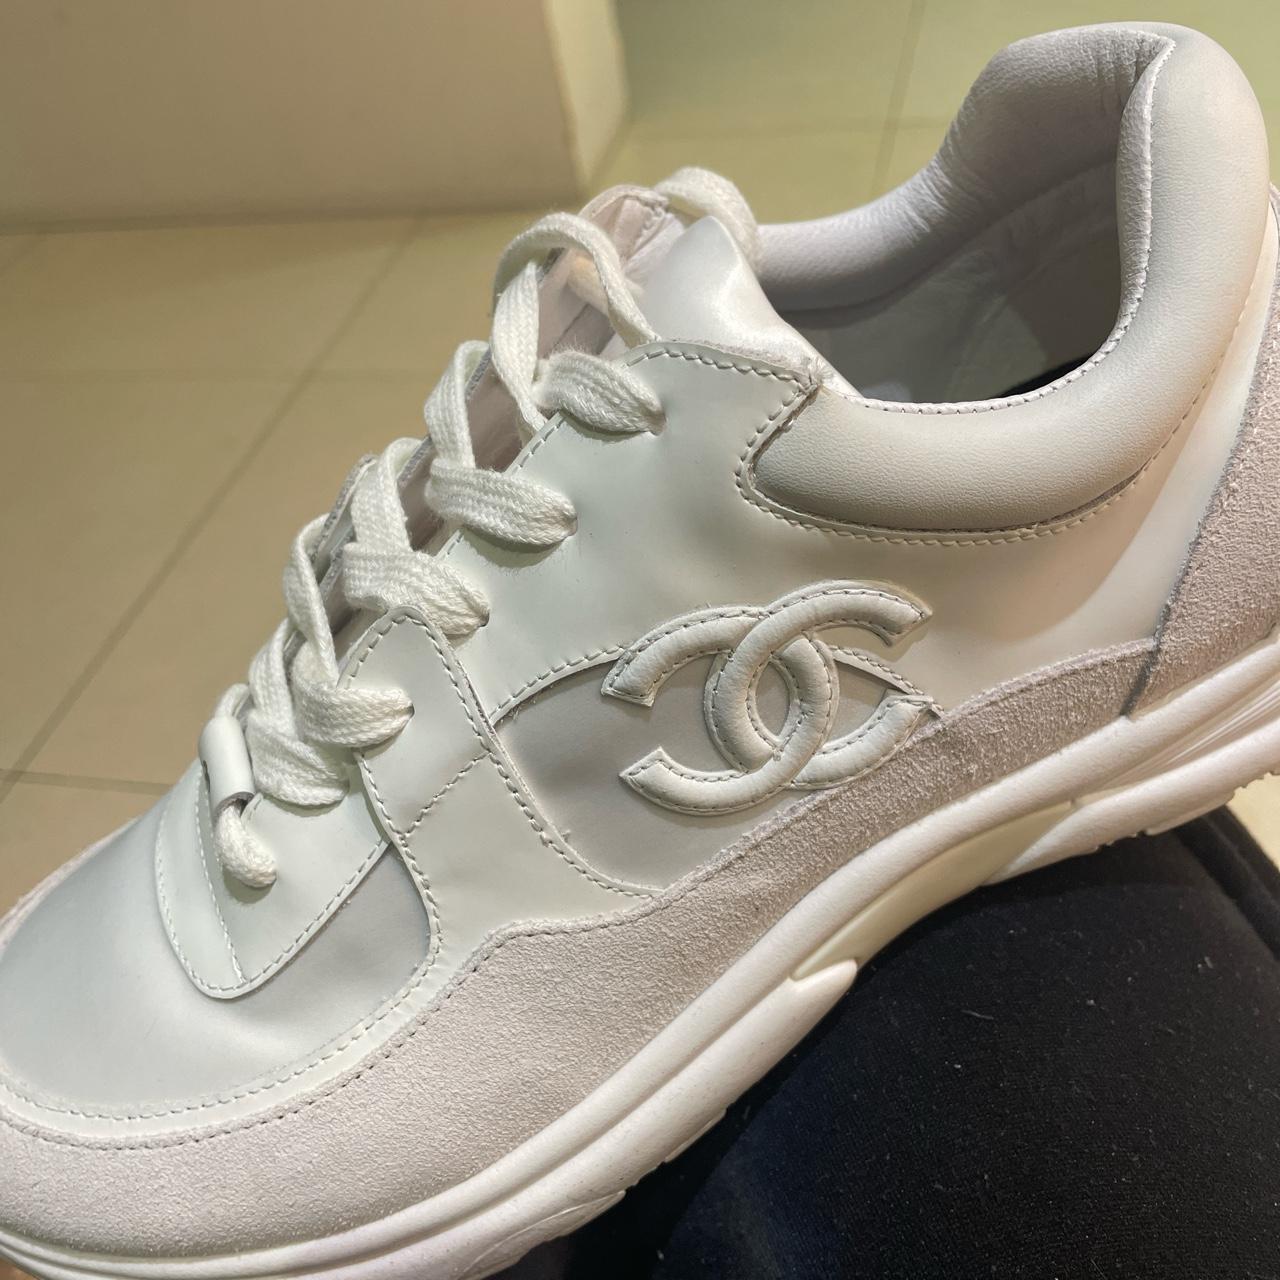 Chanel white trainers - worn once - size 42 ladies... - Depop